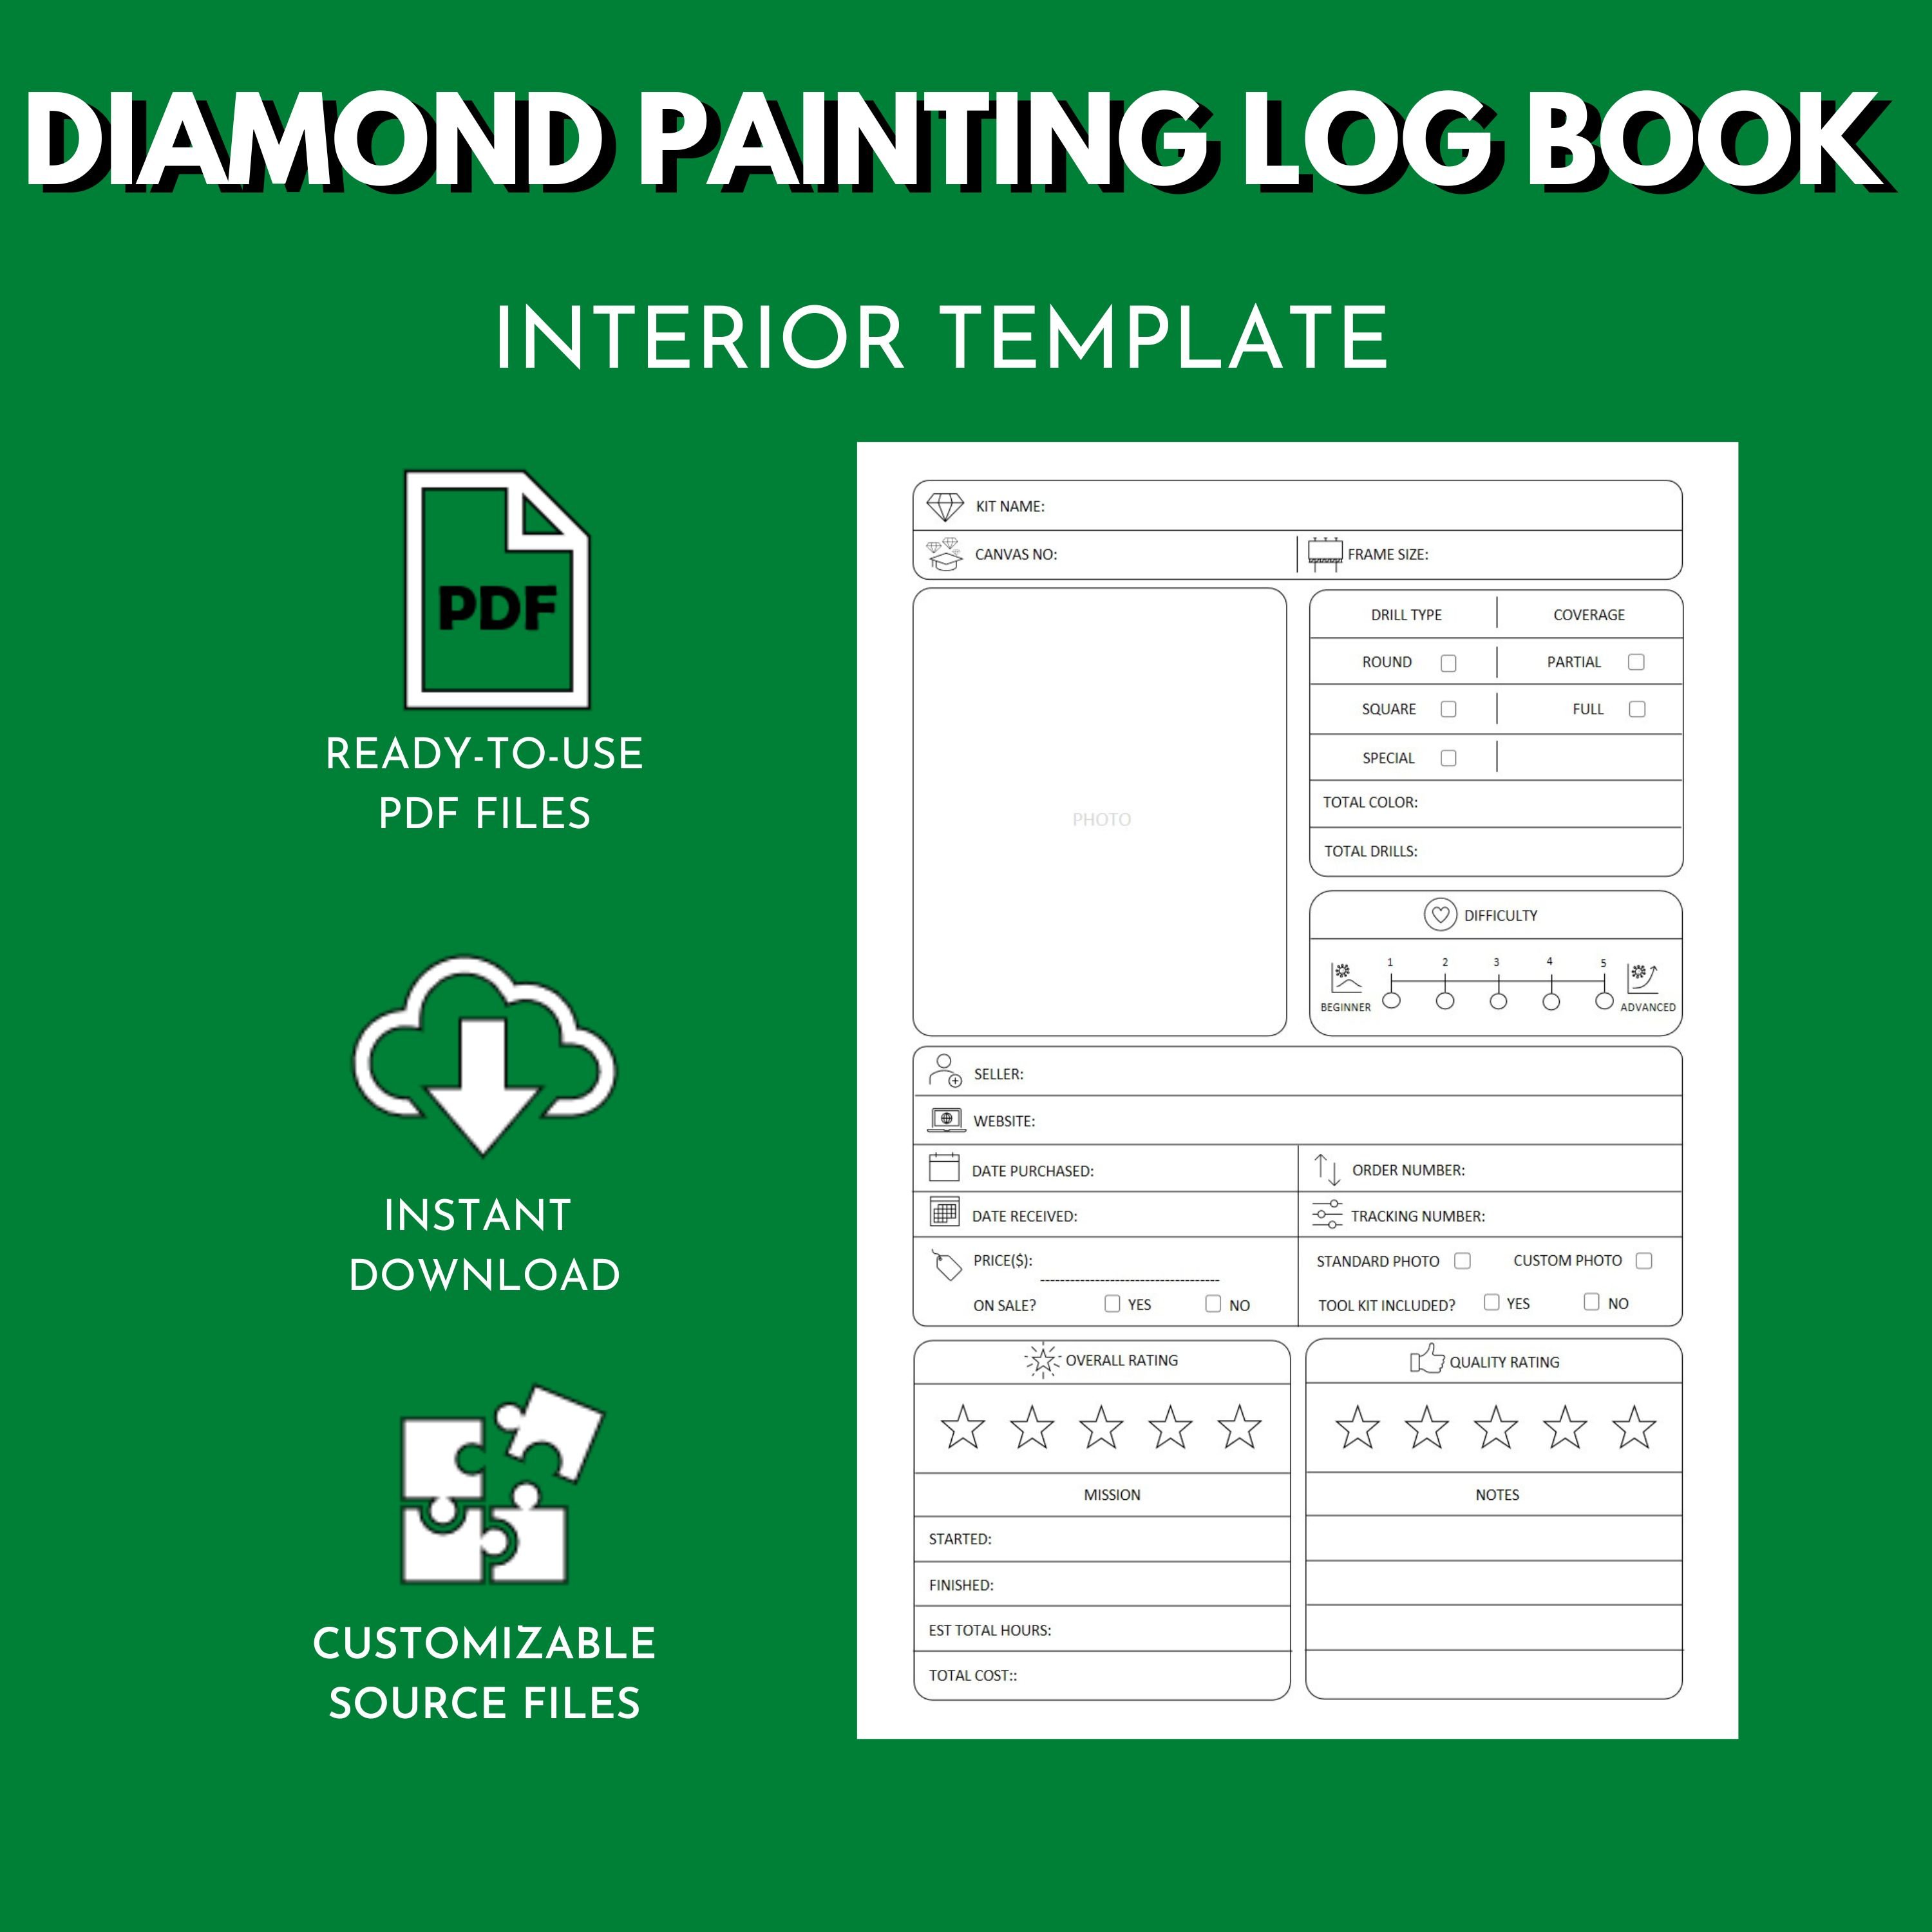 Diamond Painting Log Book – KDP Interior Graphic by graphinize